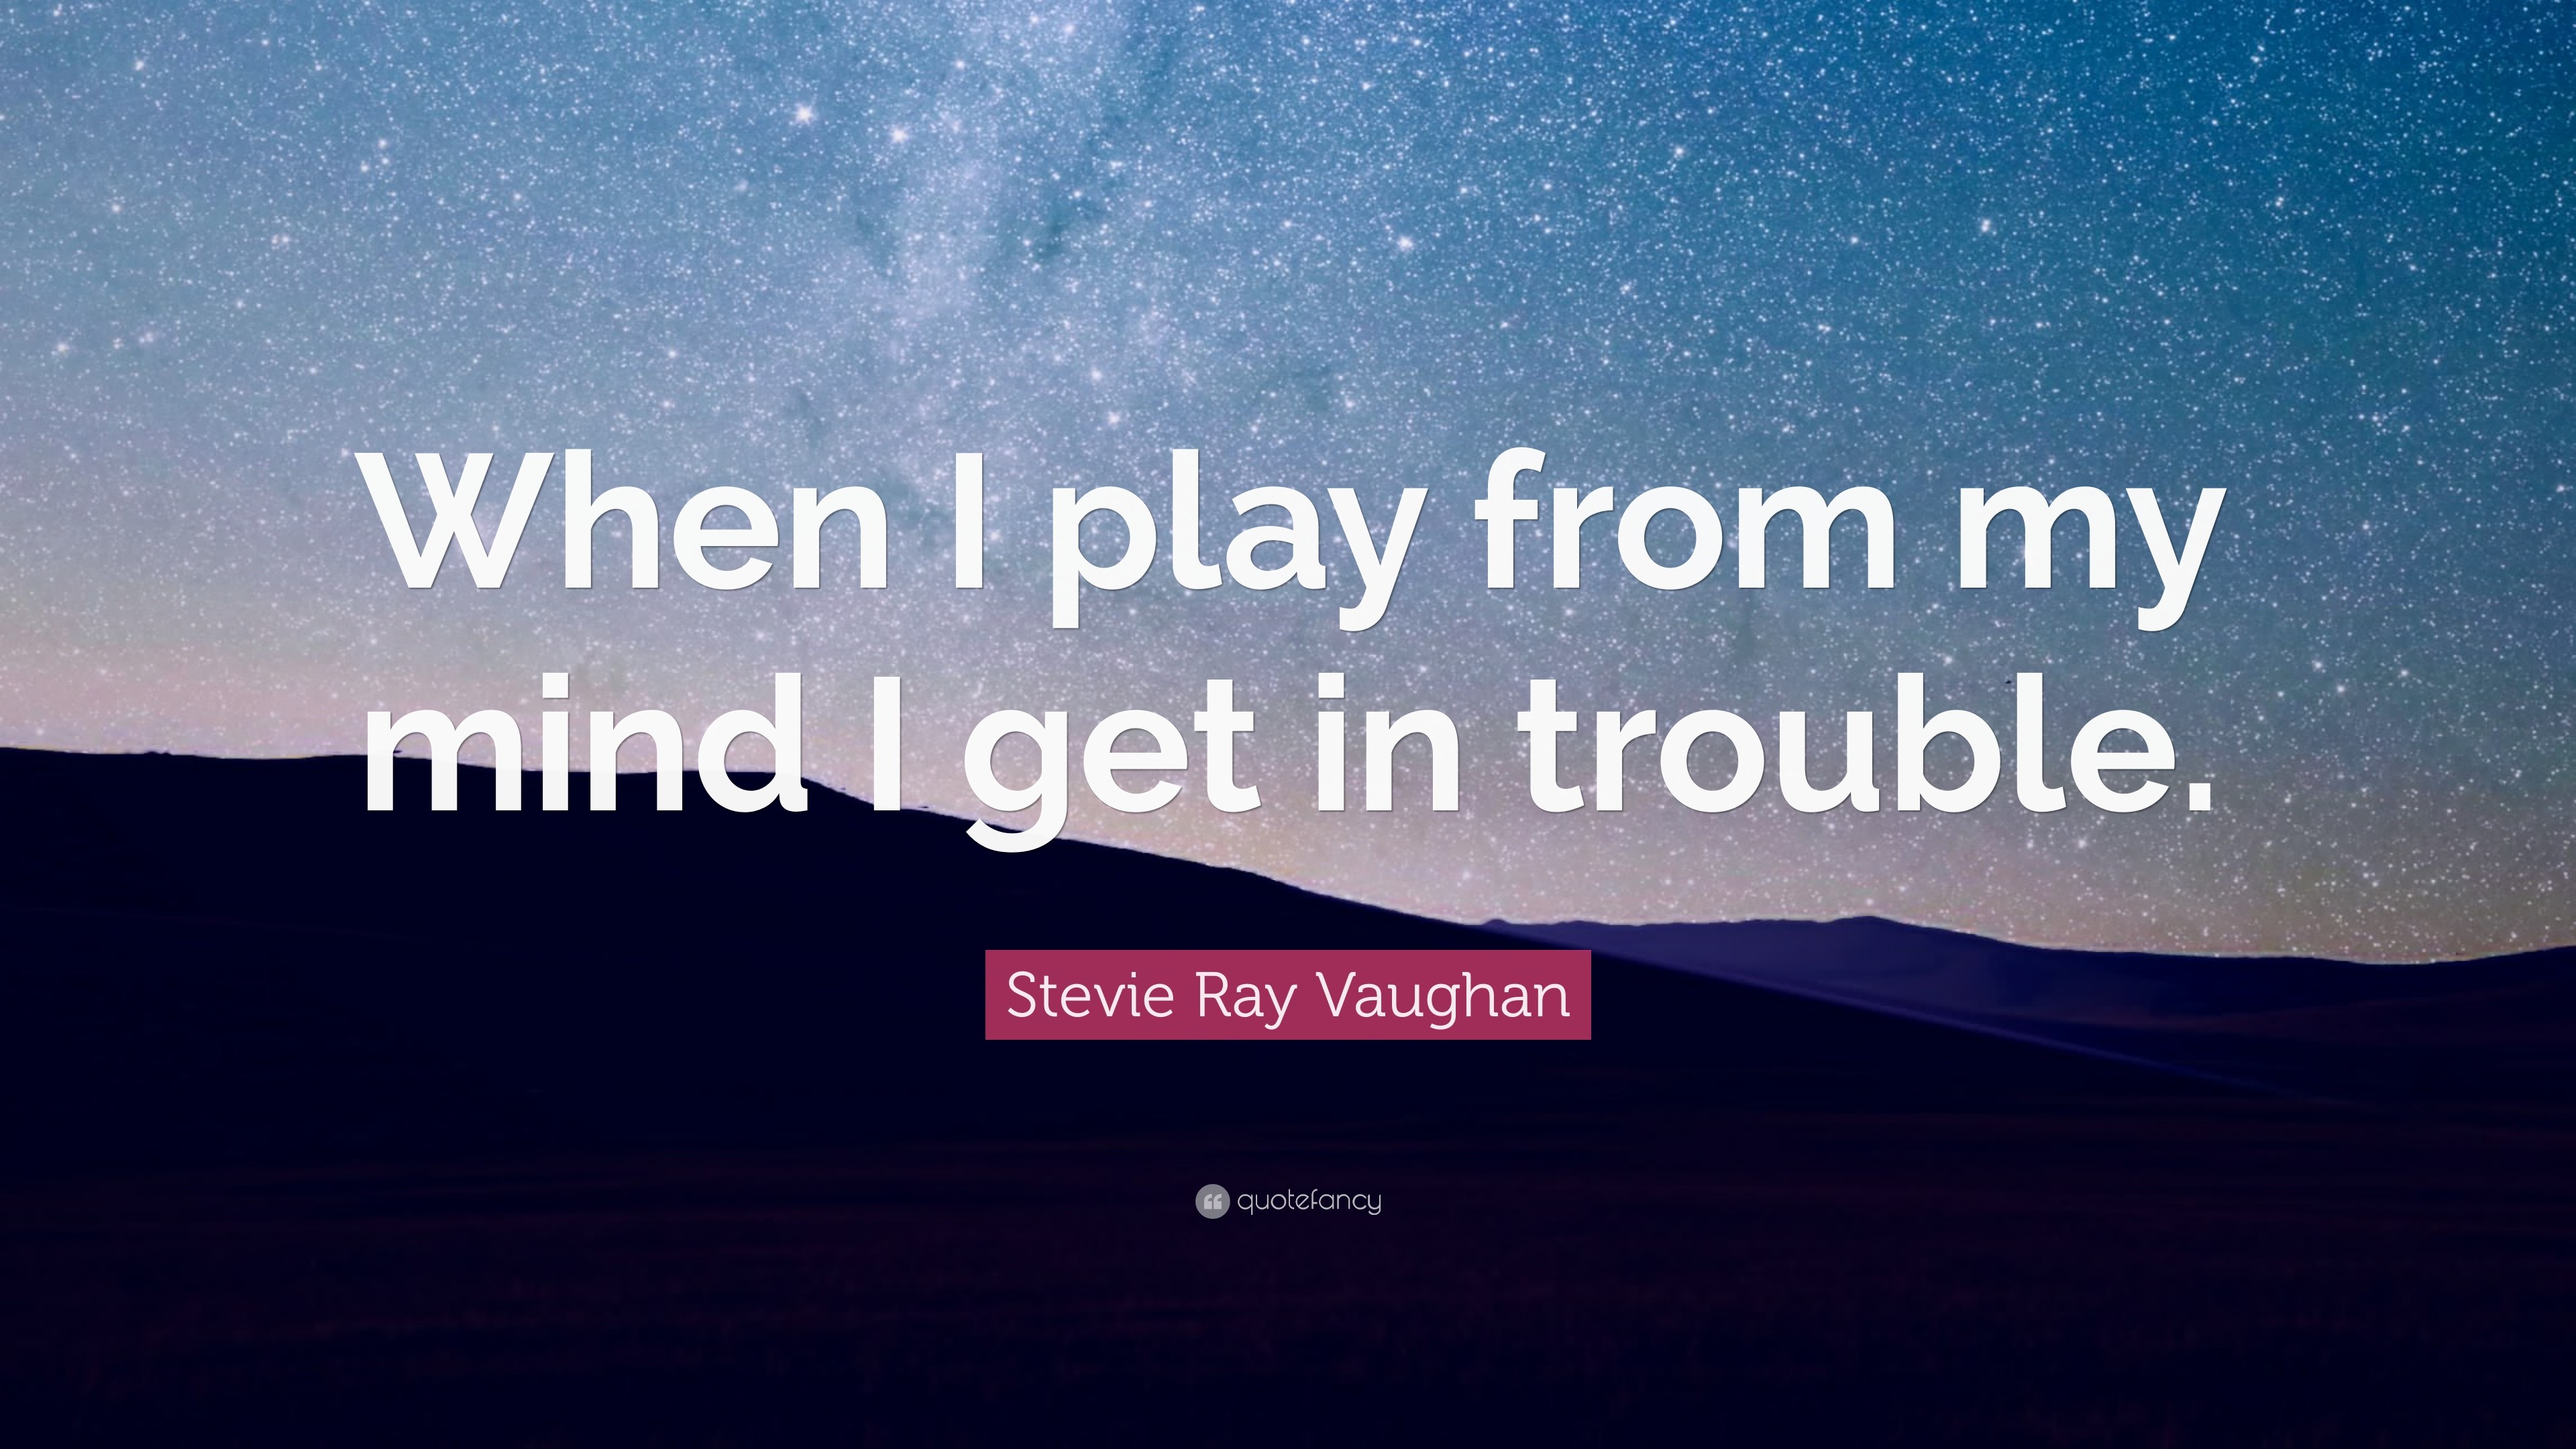 3840x2160 Stevie Ray Vaughan Quote: “When I play from my mind I get in trouble